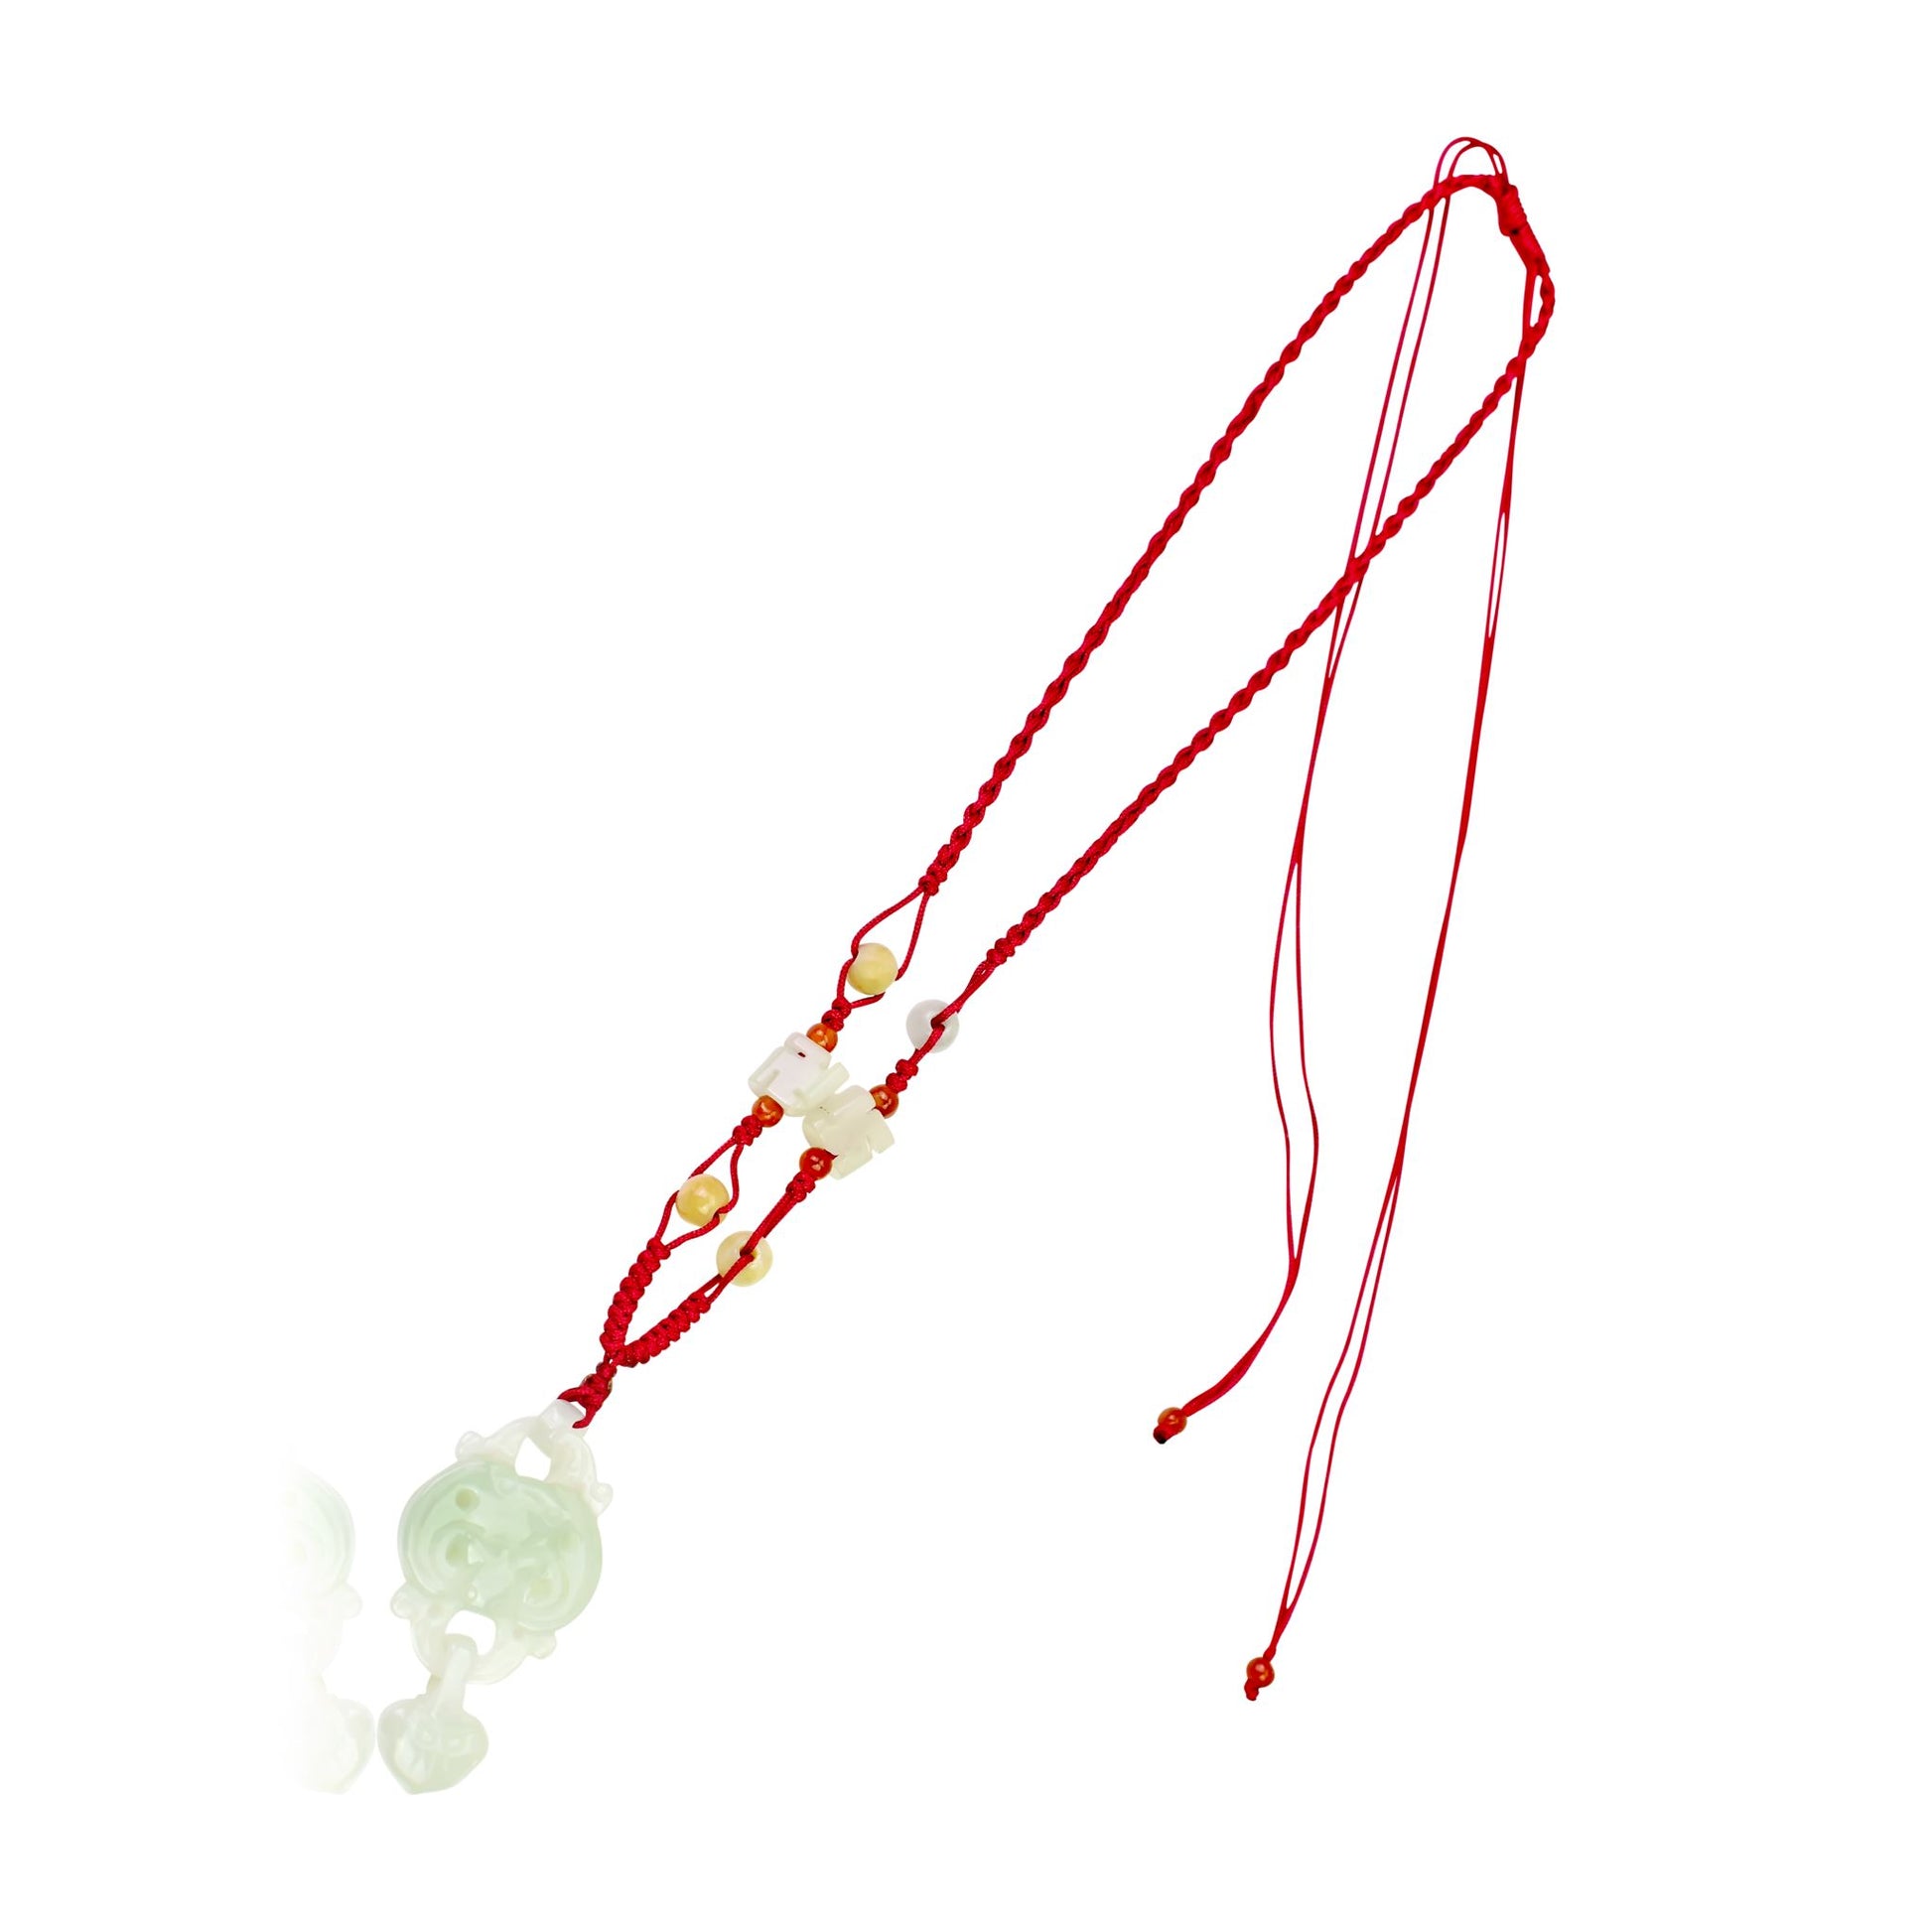 Elevate your Luck with Bat and Heart Handmade Jade Necklace Pendant made with Red Cord